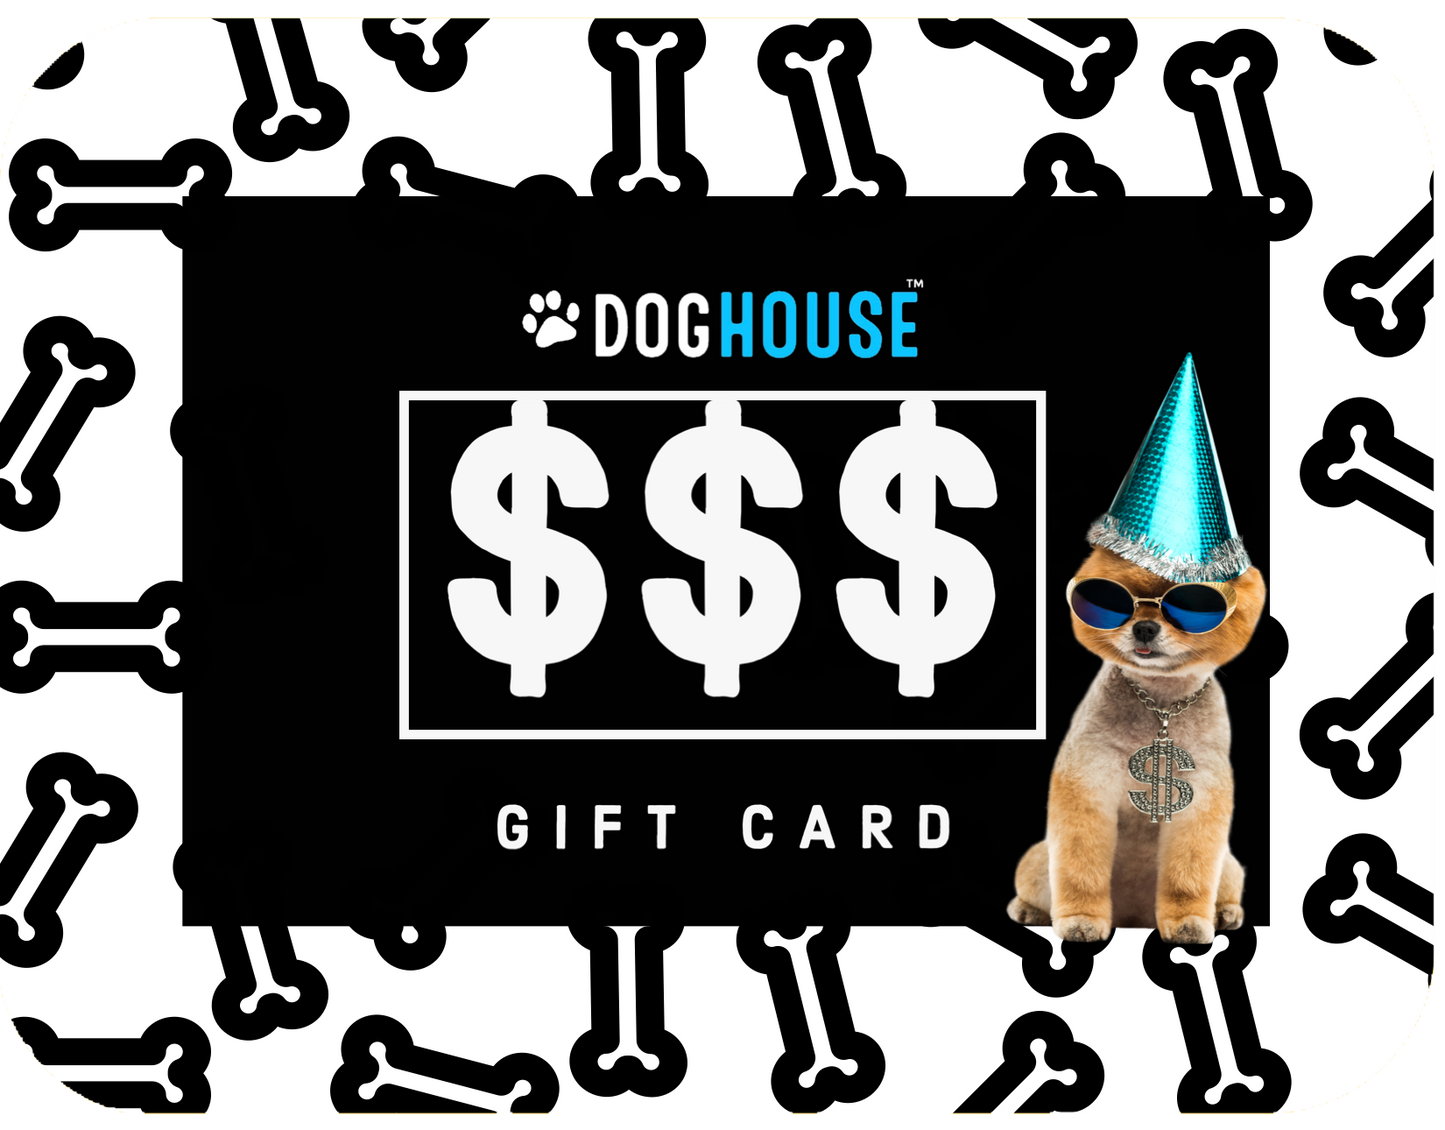 DOGHOUSE™ GIFT CARD